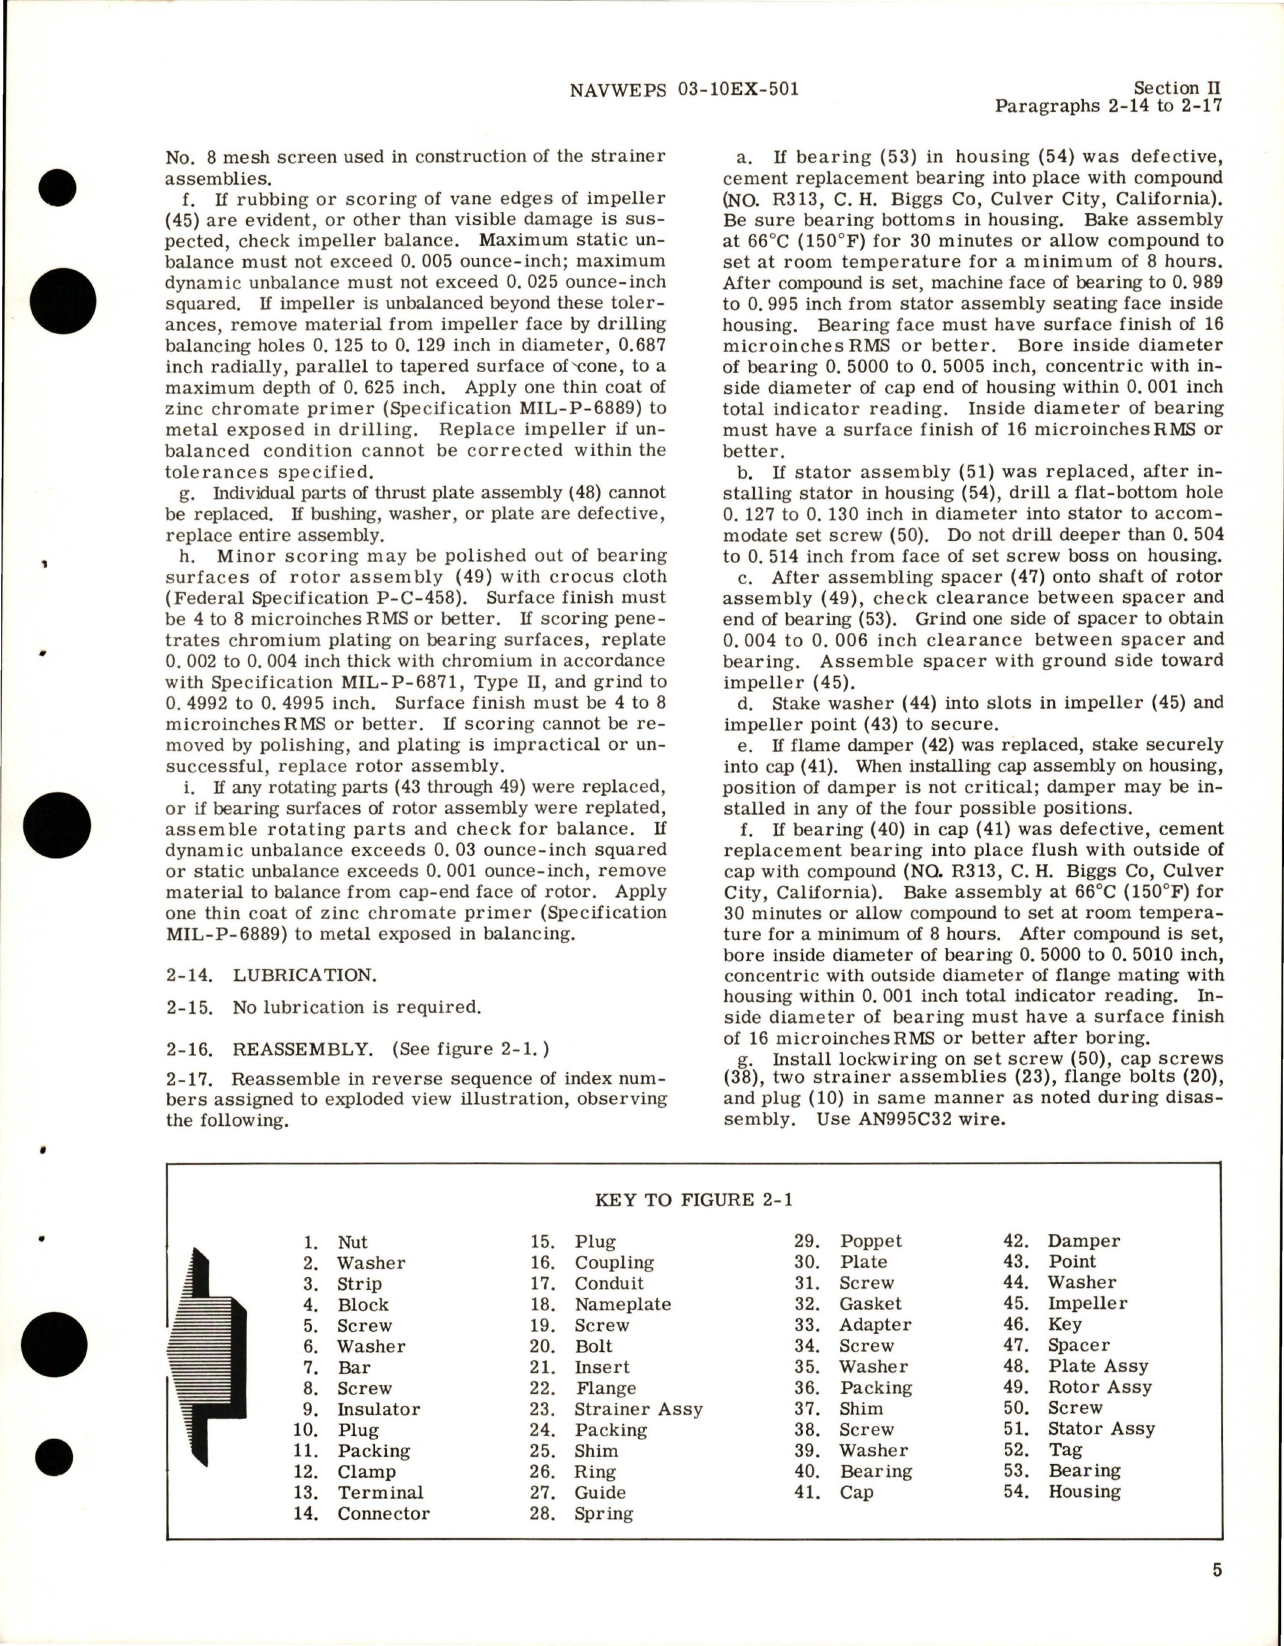 Sample page 7 from AirCorps Library document: Overhaul Instructions for Fuel Booster Pump